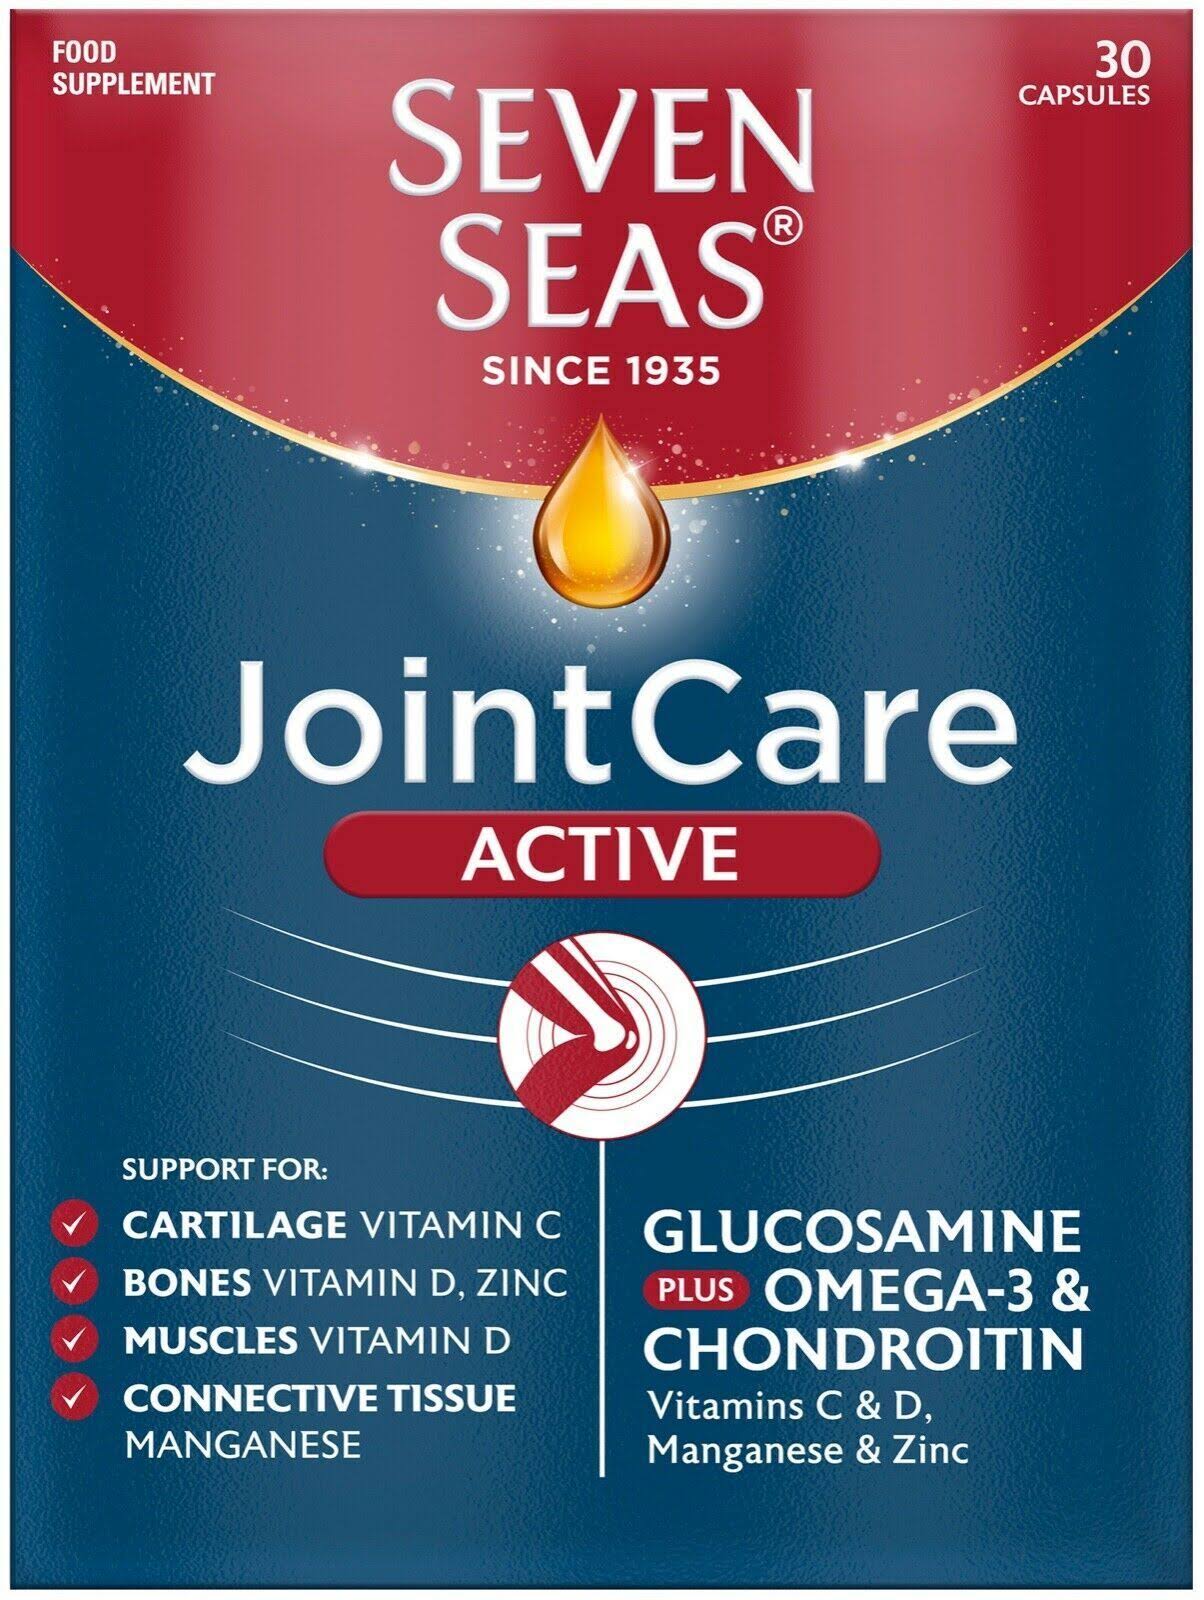 Seven Seas Jointcare Active Capsules - 30ct